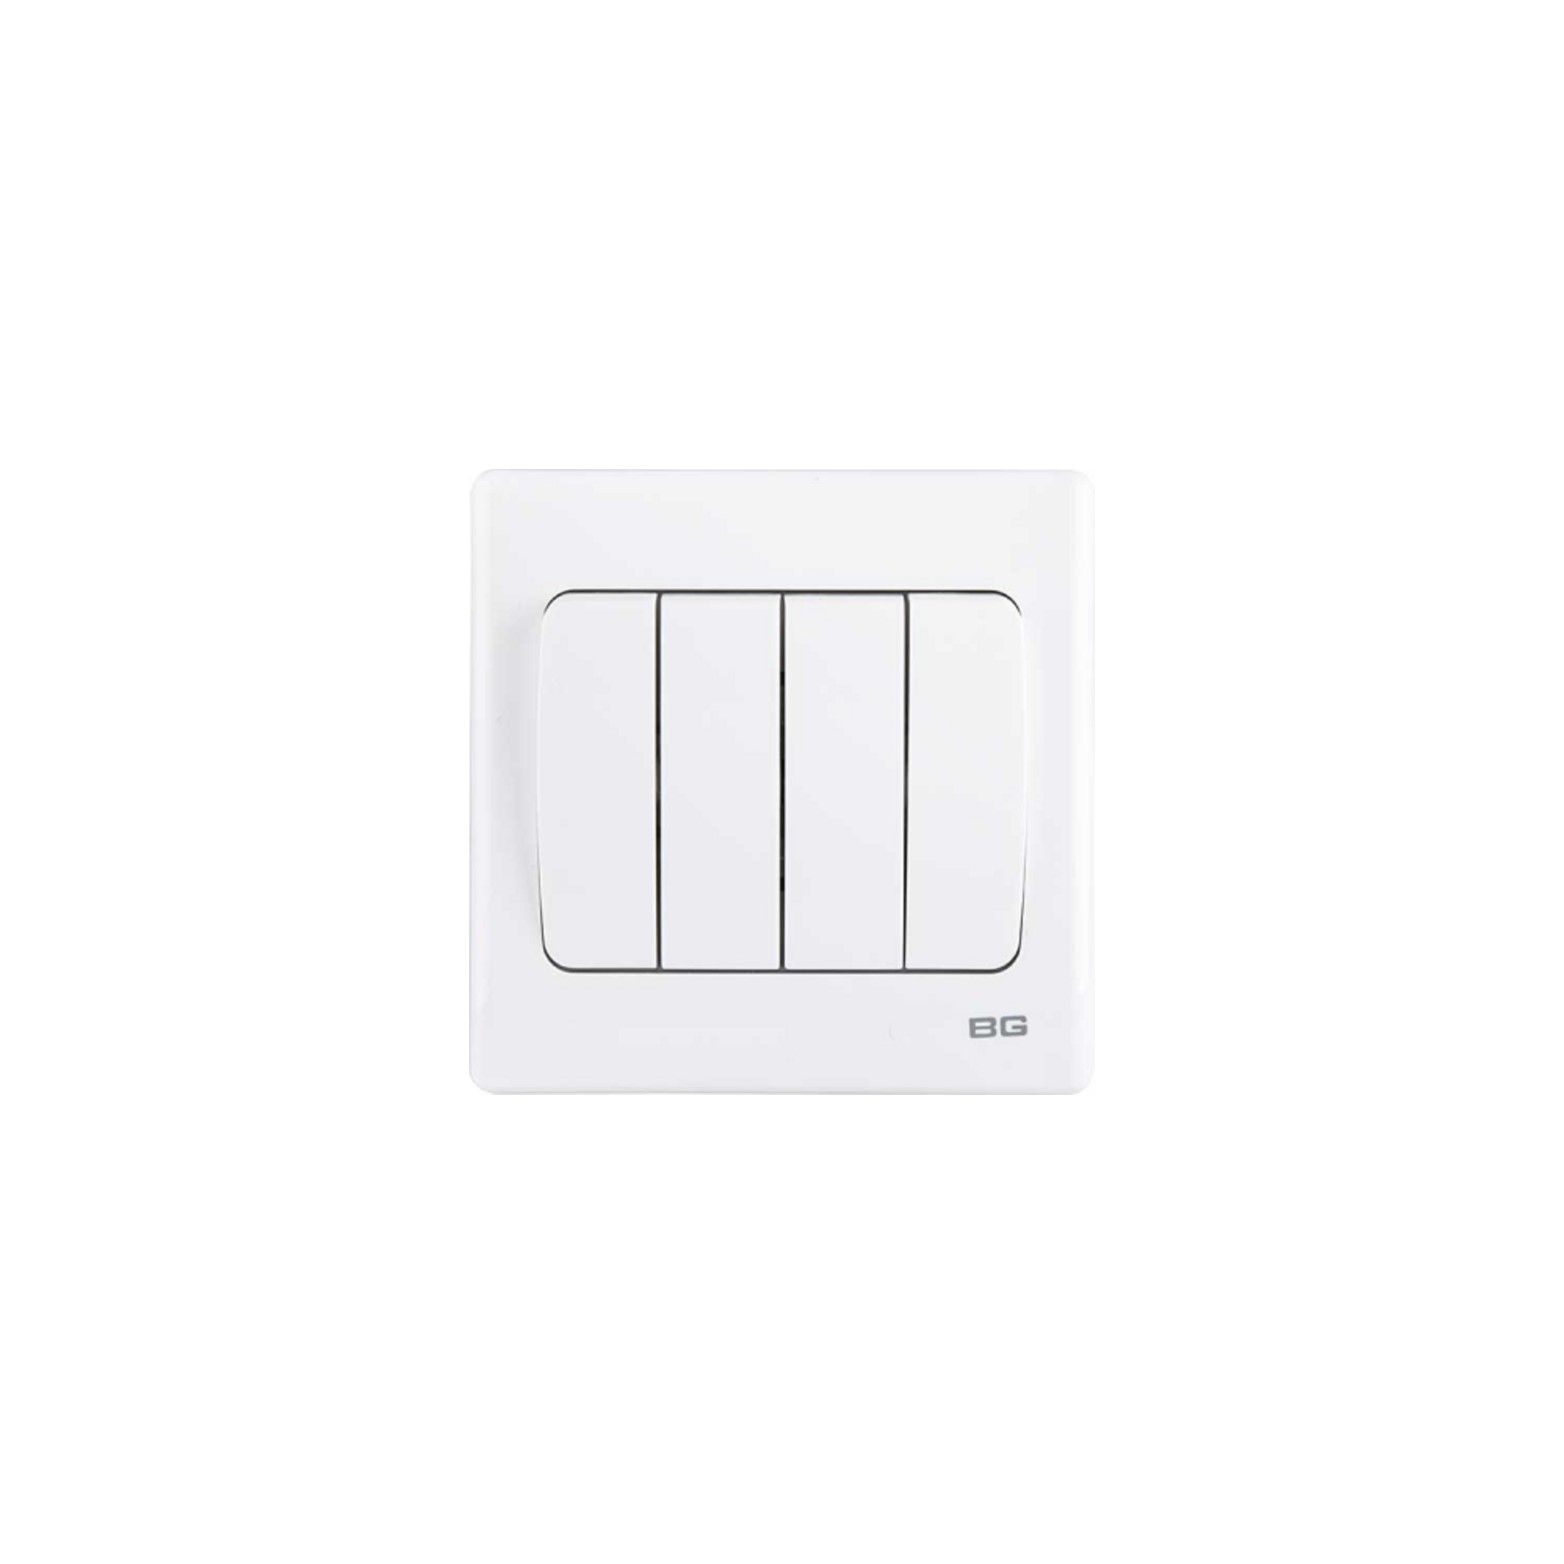 White SlimLine 4-Gang 2Way 10AX Switch, four screwless clip-on front plate curved corners(PCWH44W)